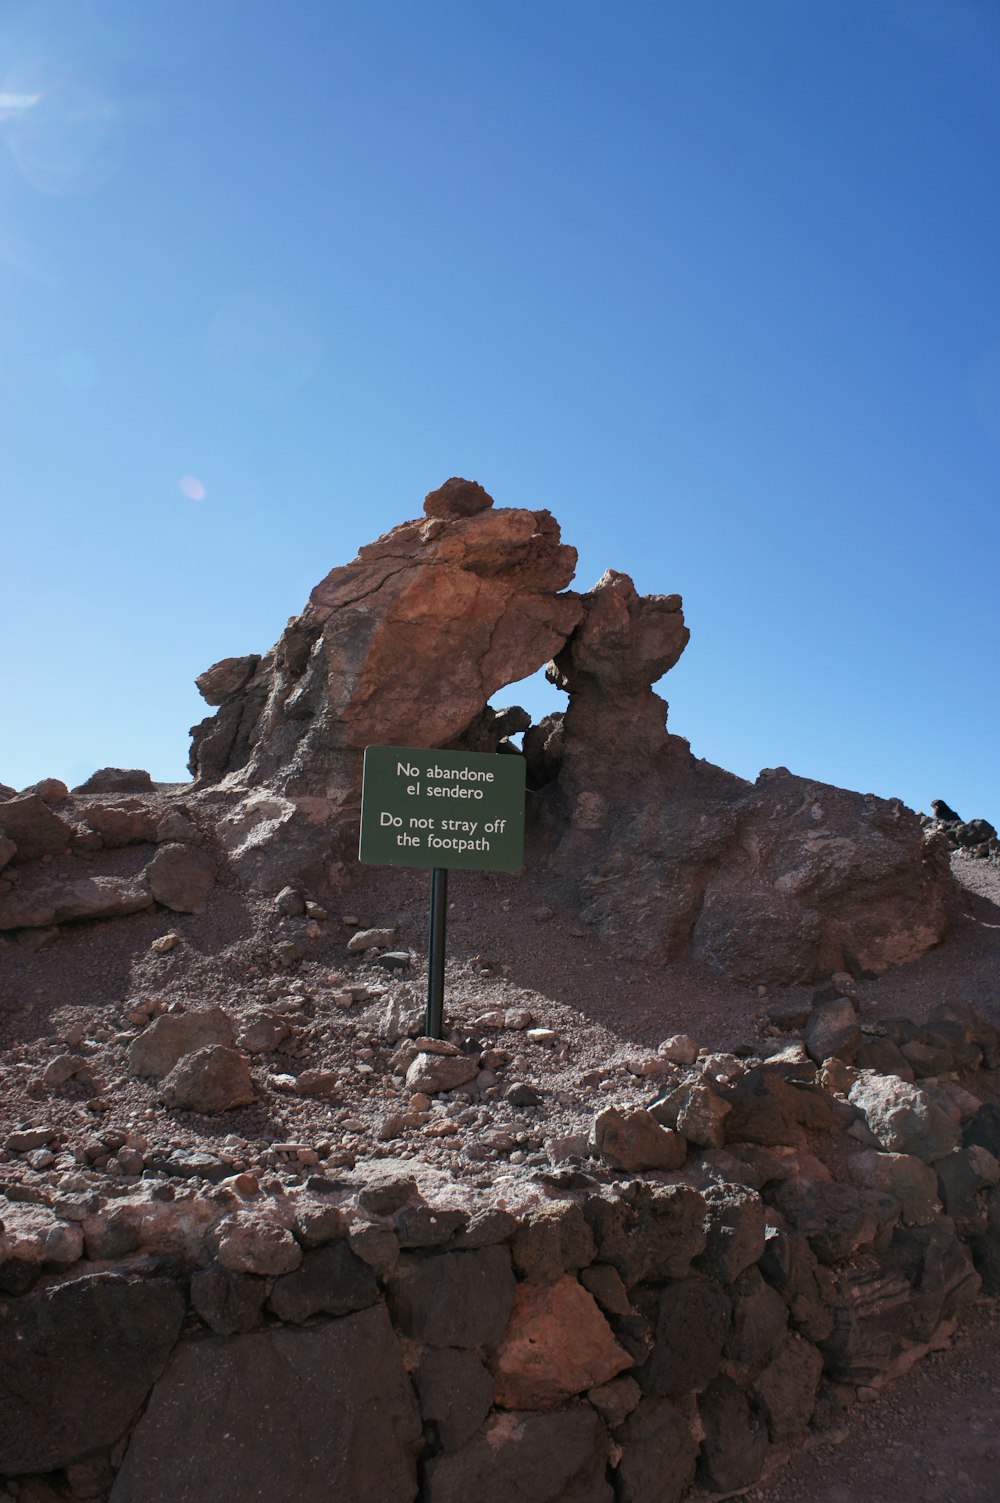 a sign on a rock outcropping in the desert